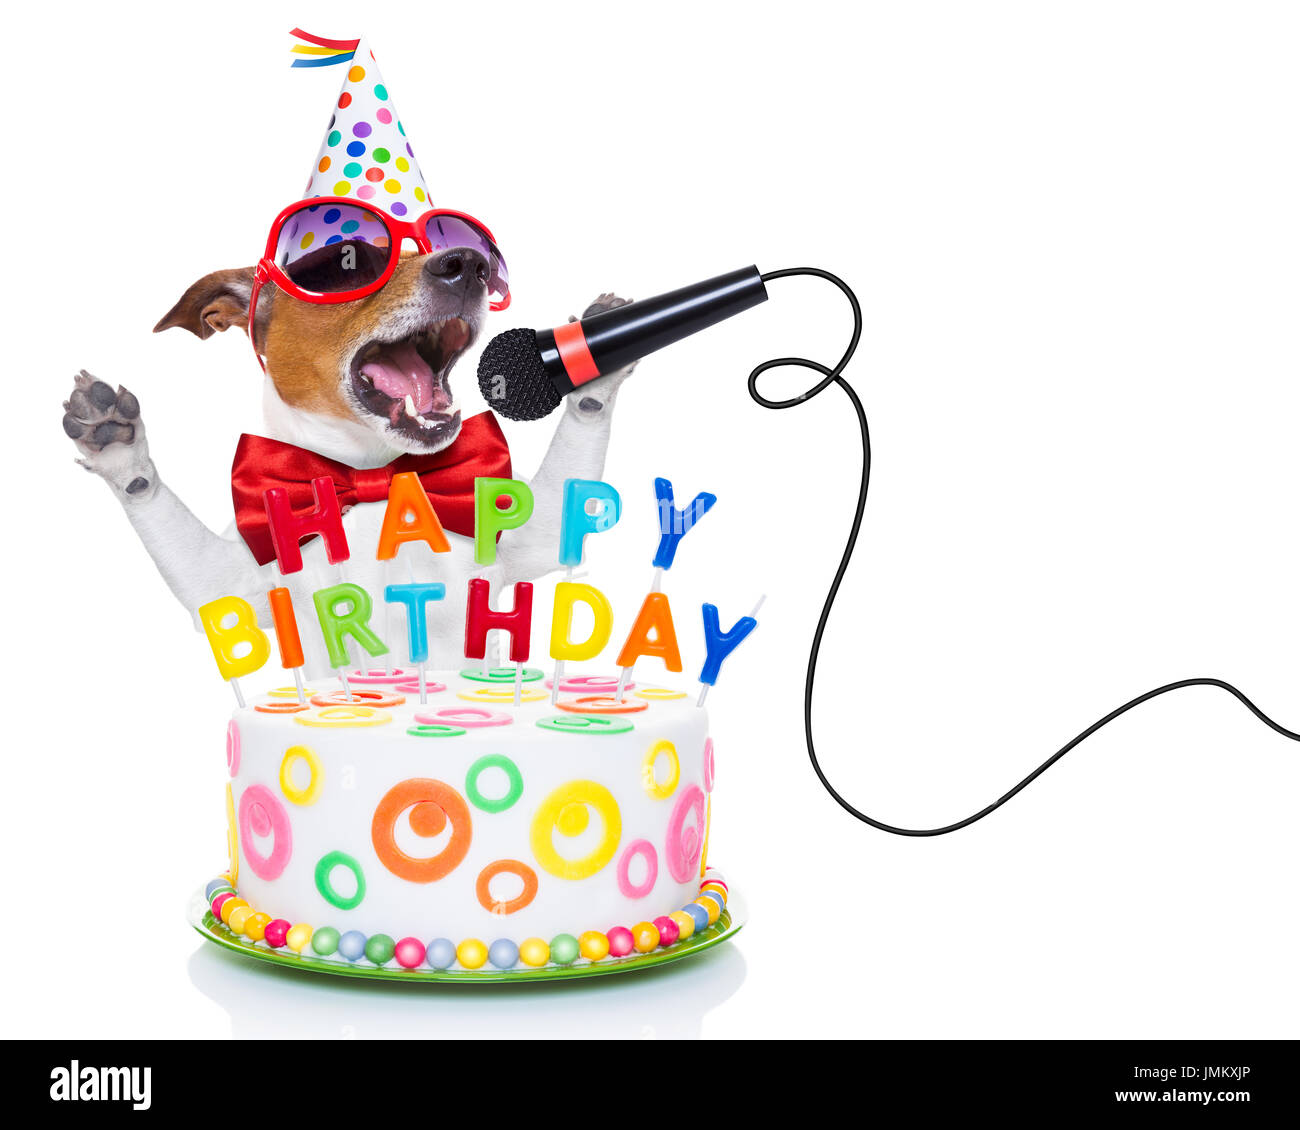 Jack Russell Dog As A Surprise Singing Birthday Song Like Karaoke With Microphone Behind Funny Cake Wearing Red Tie And Party Hat Isolated O Stock Photo Alamy